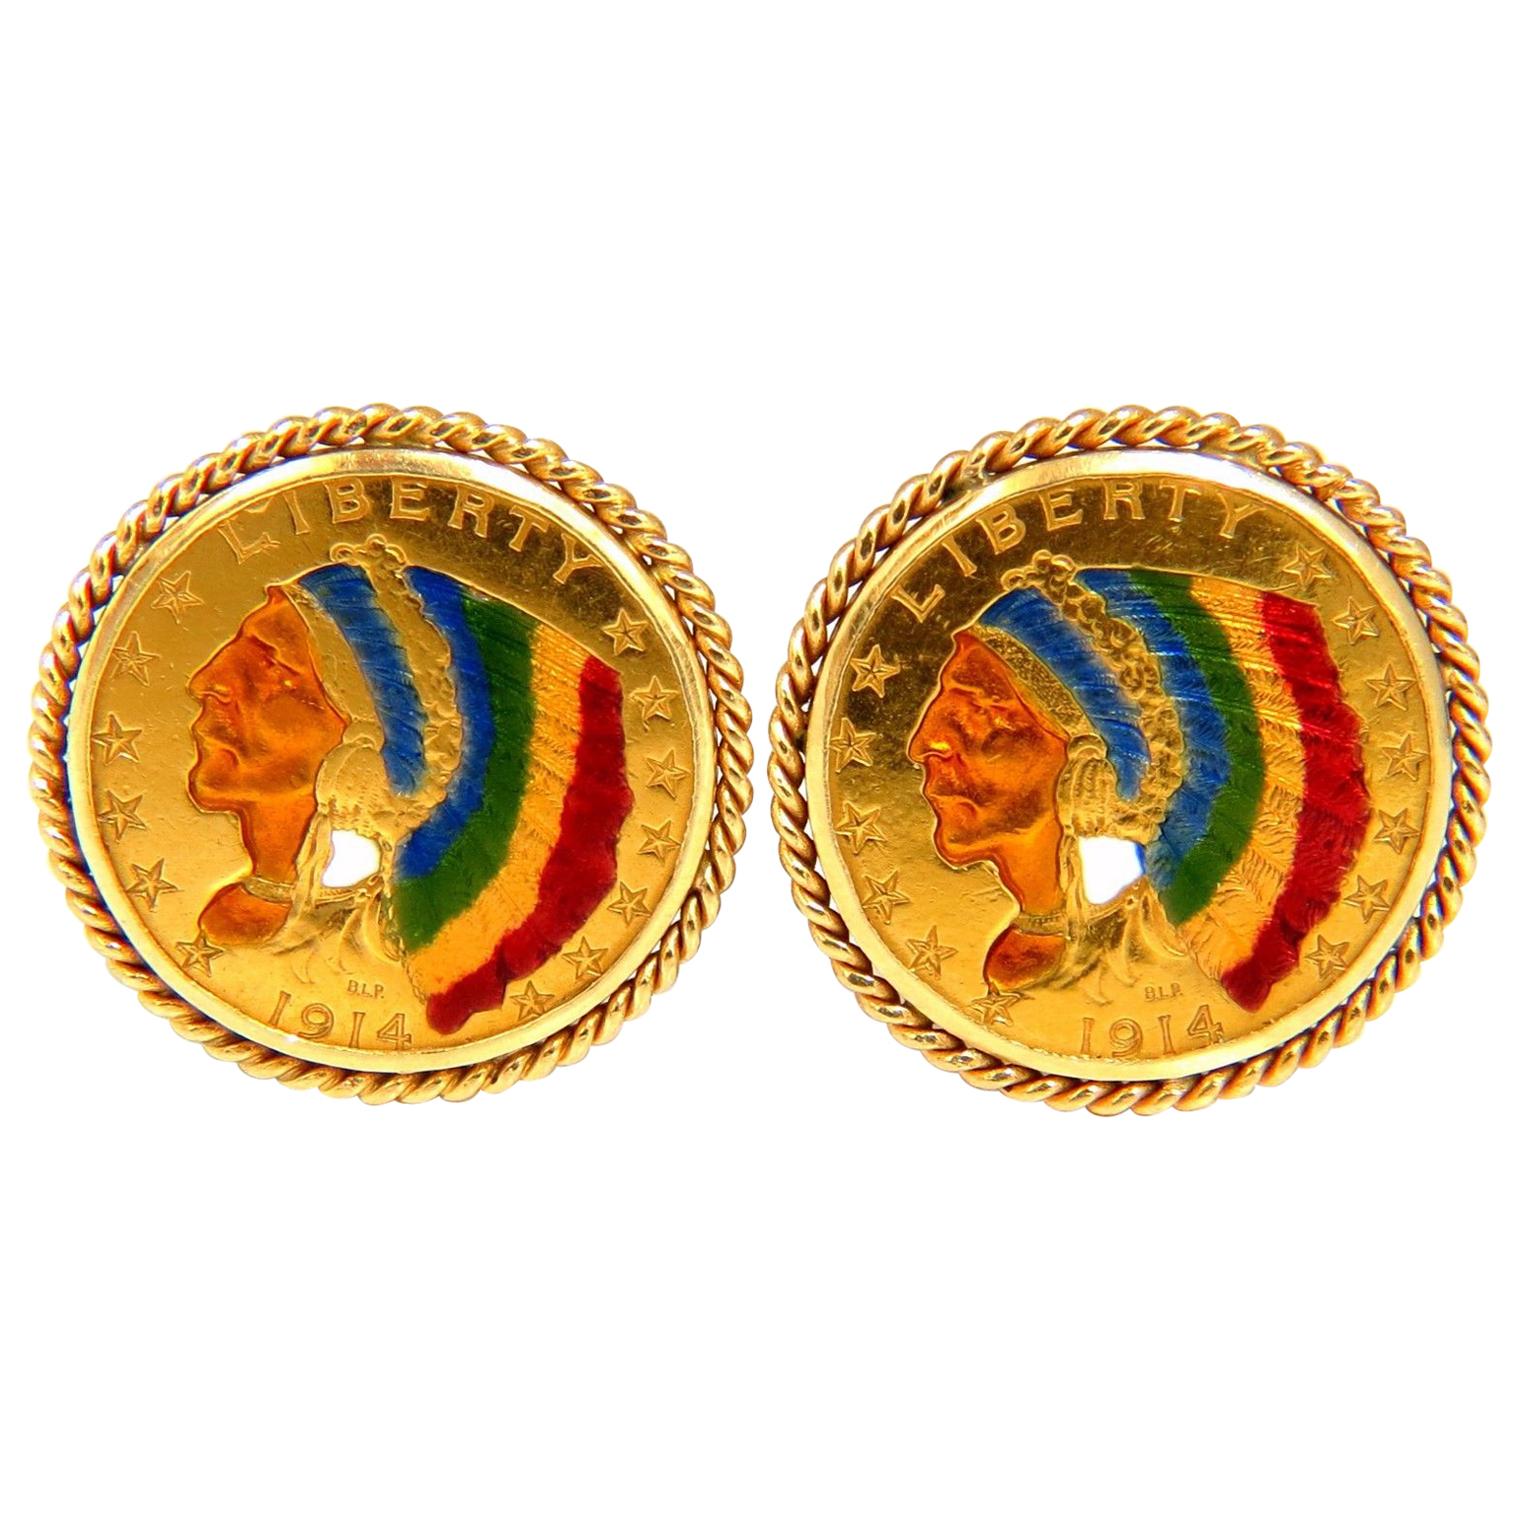 1914 'Two' BLP US Liberty Gold Coin Cufflinks Enamel Detail Rope Twist For Sale